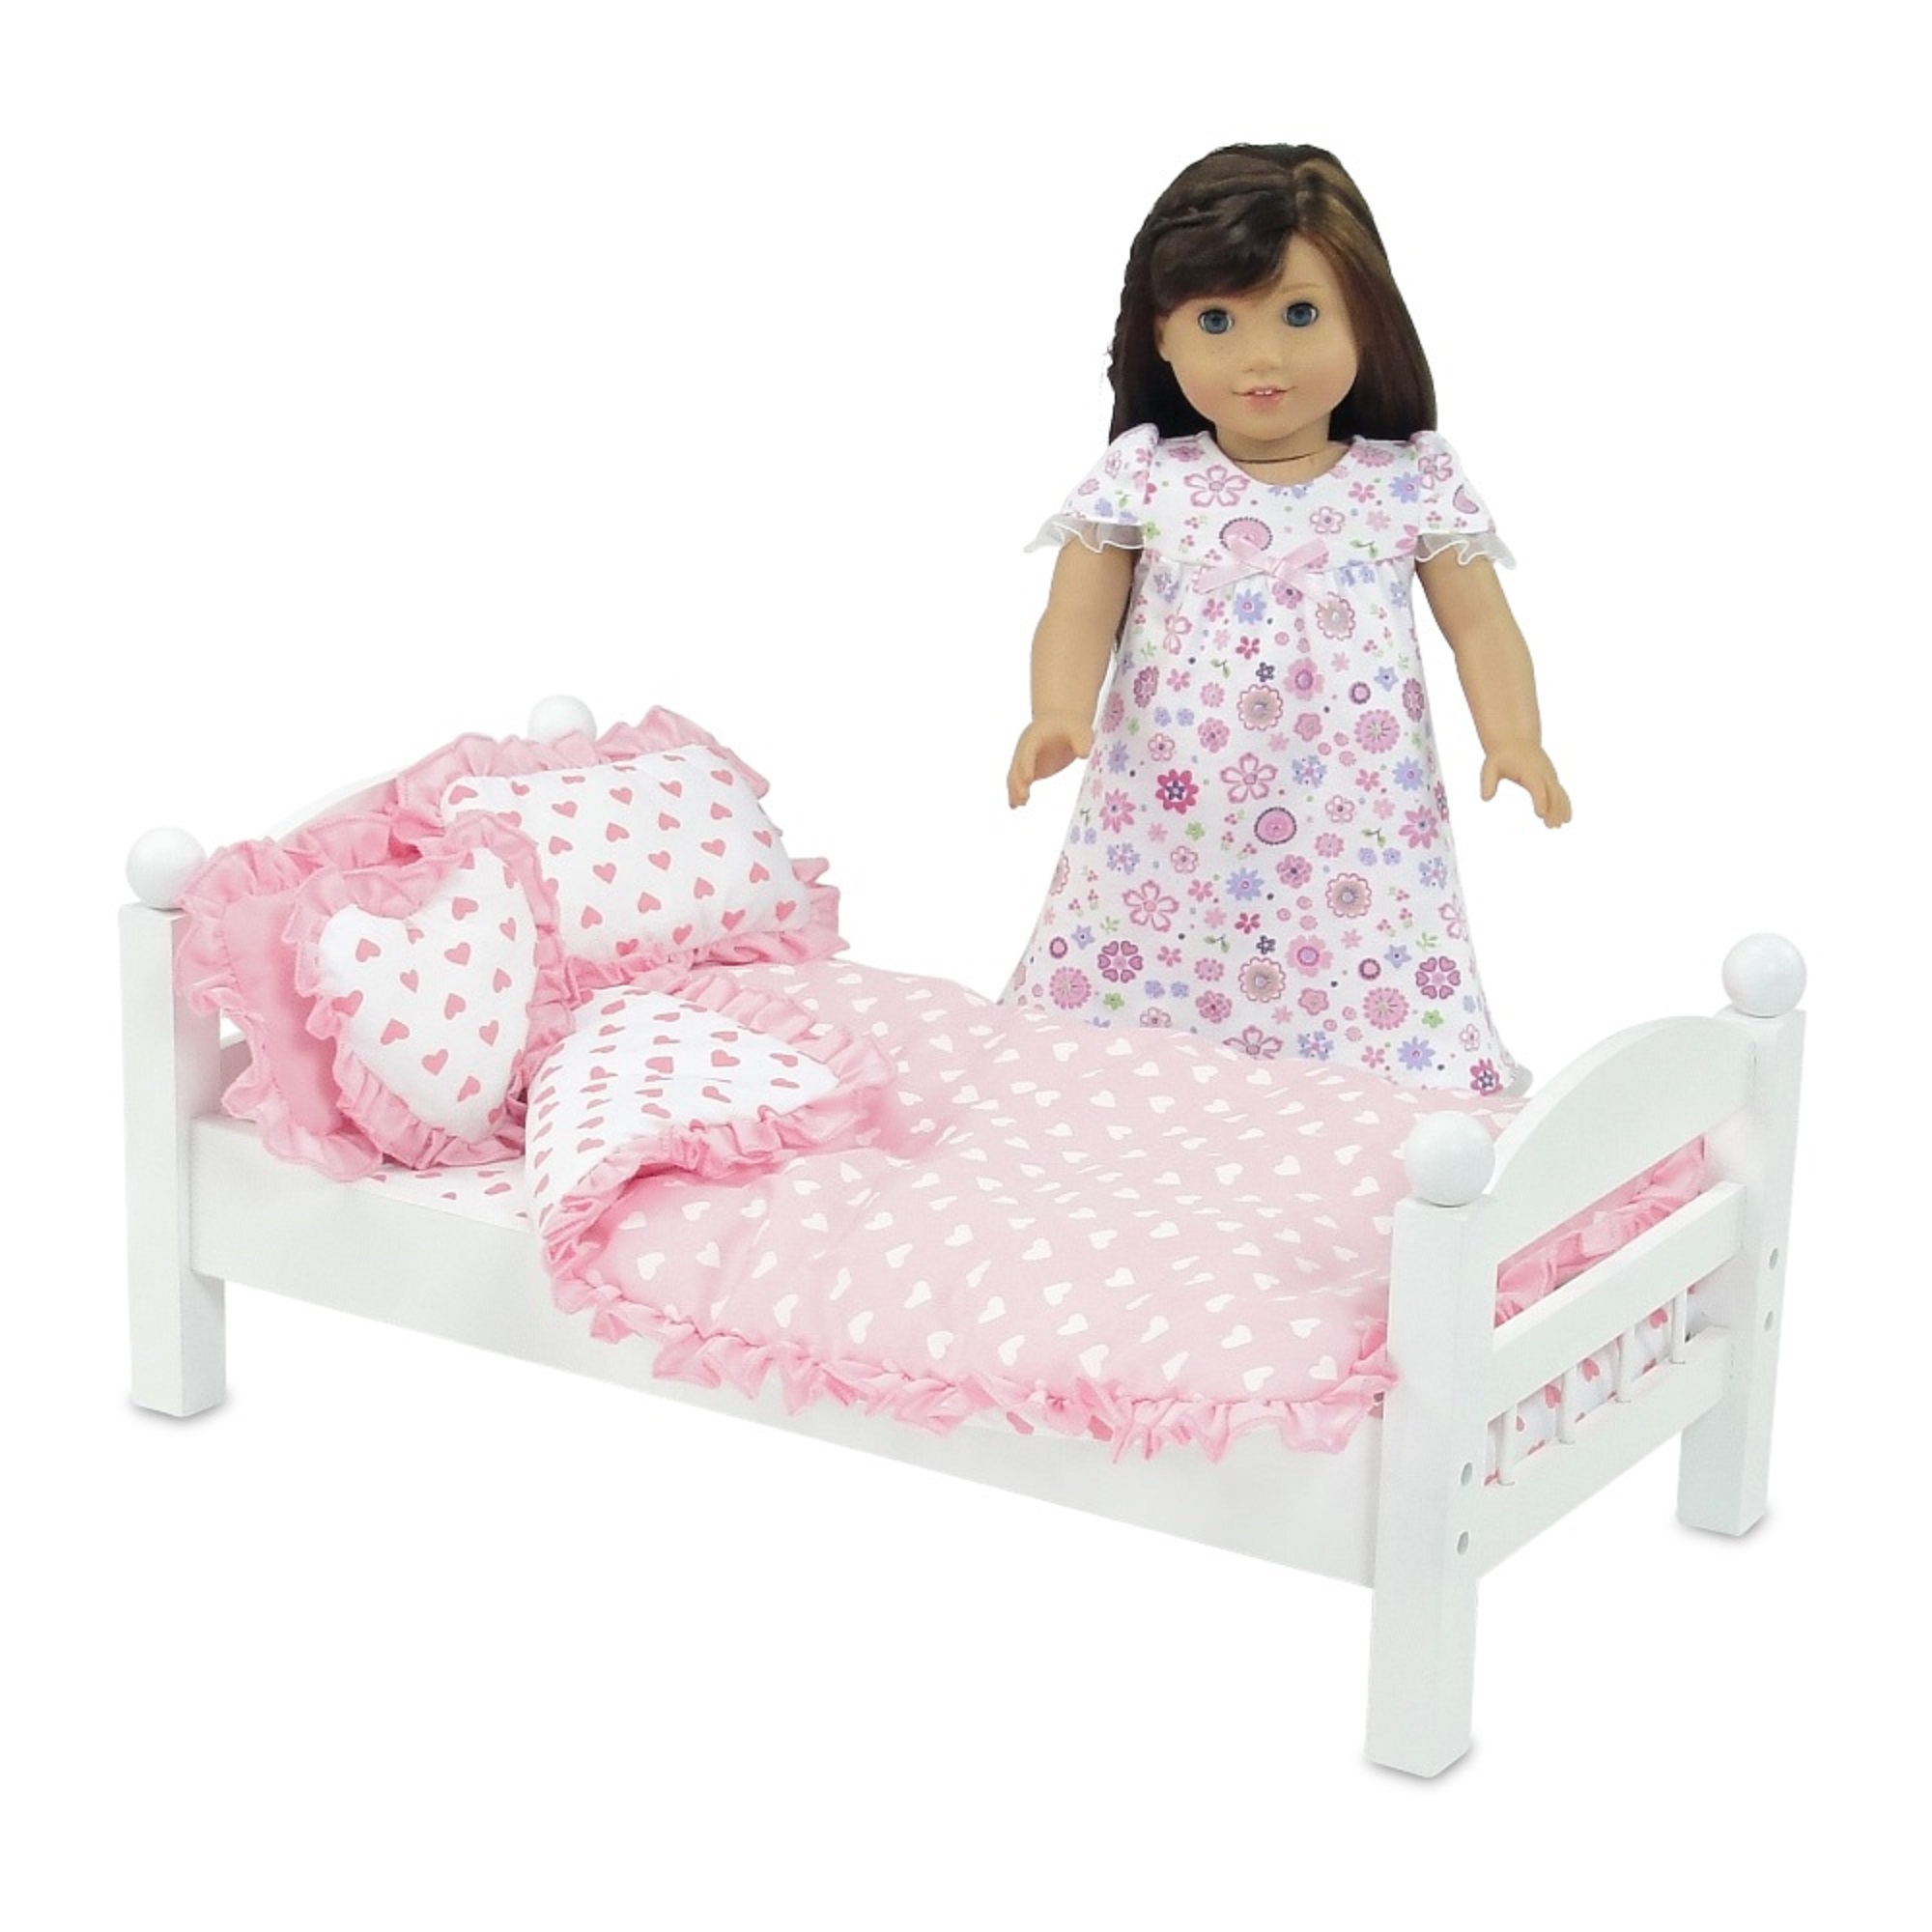 Emily Rose 18 Inch Doll Accessories | Reversible Pink Ruffled 5 Piece Doll Bedding Set | Fits 18" Doll Beds - image 2 of 7